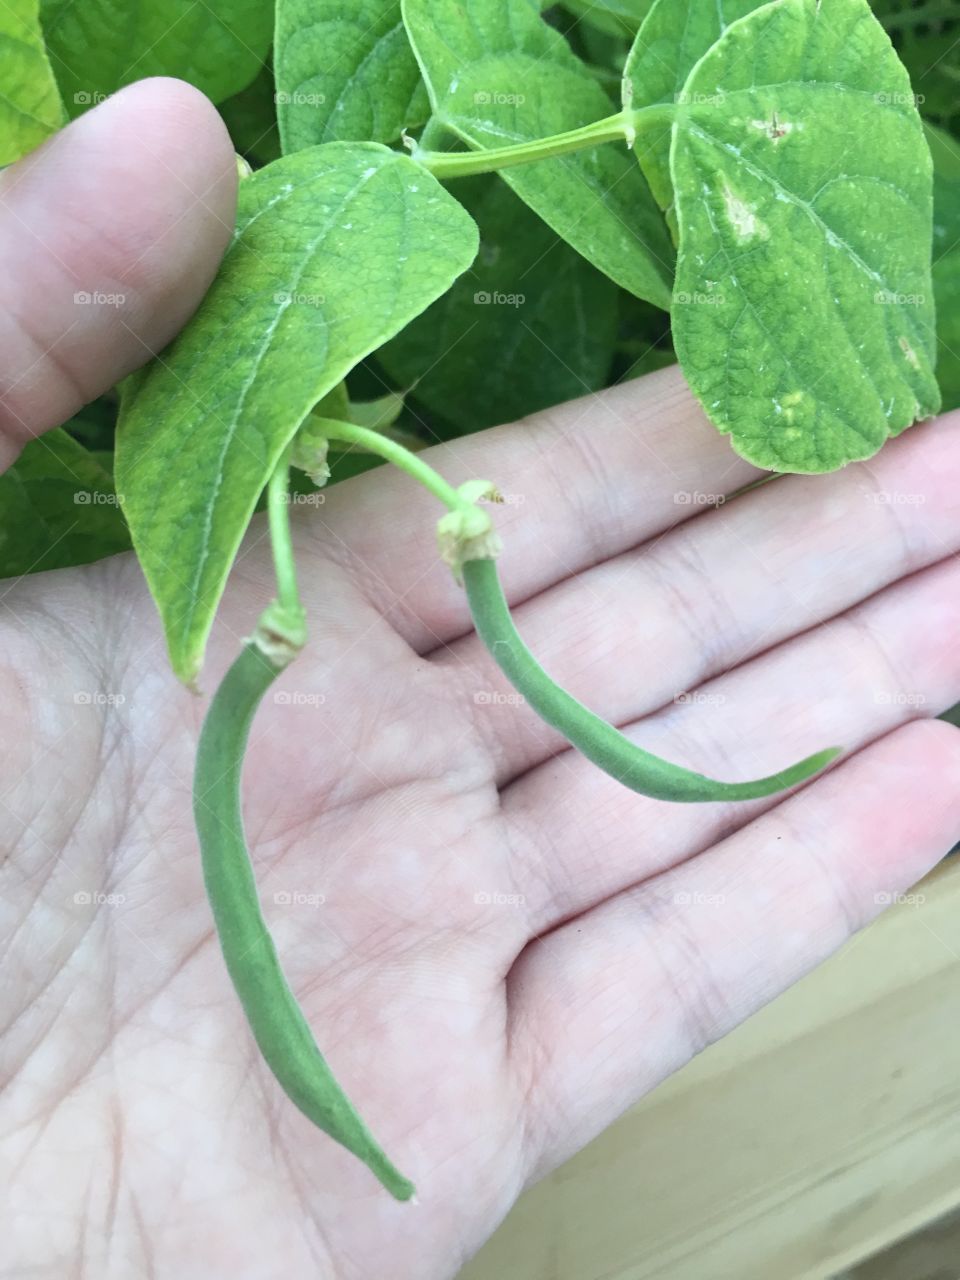 Green beans growing on the plant